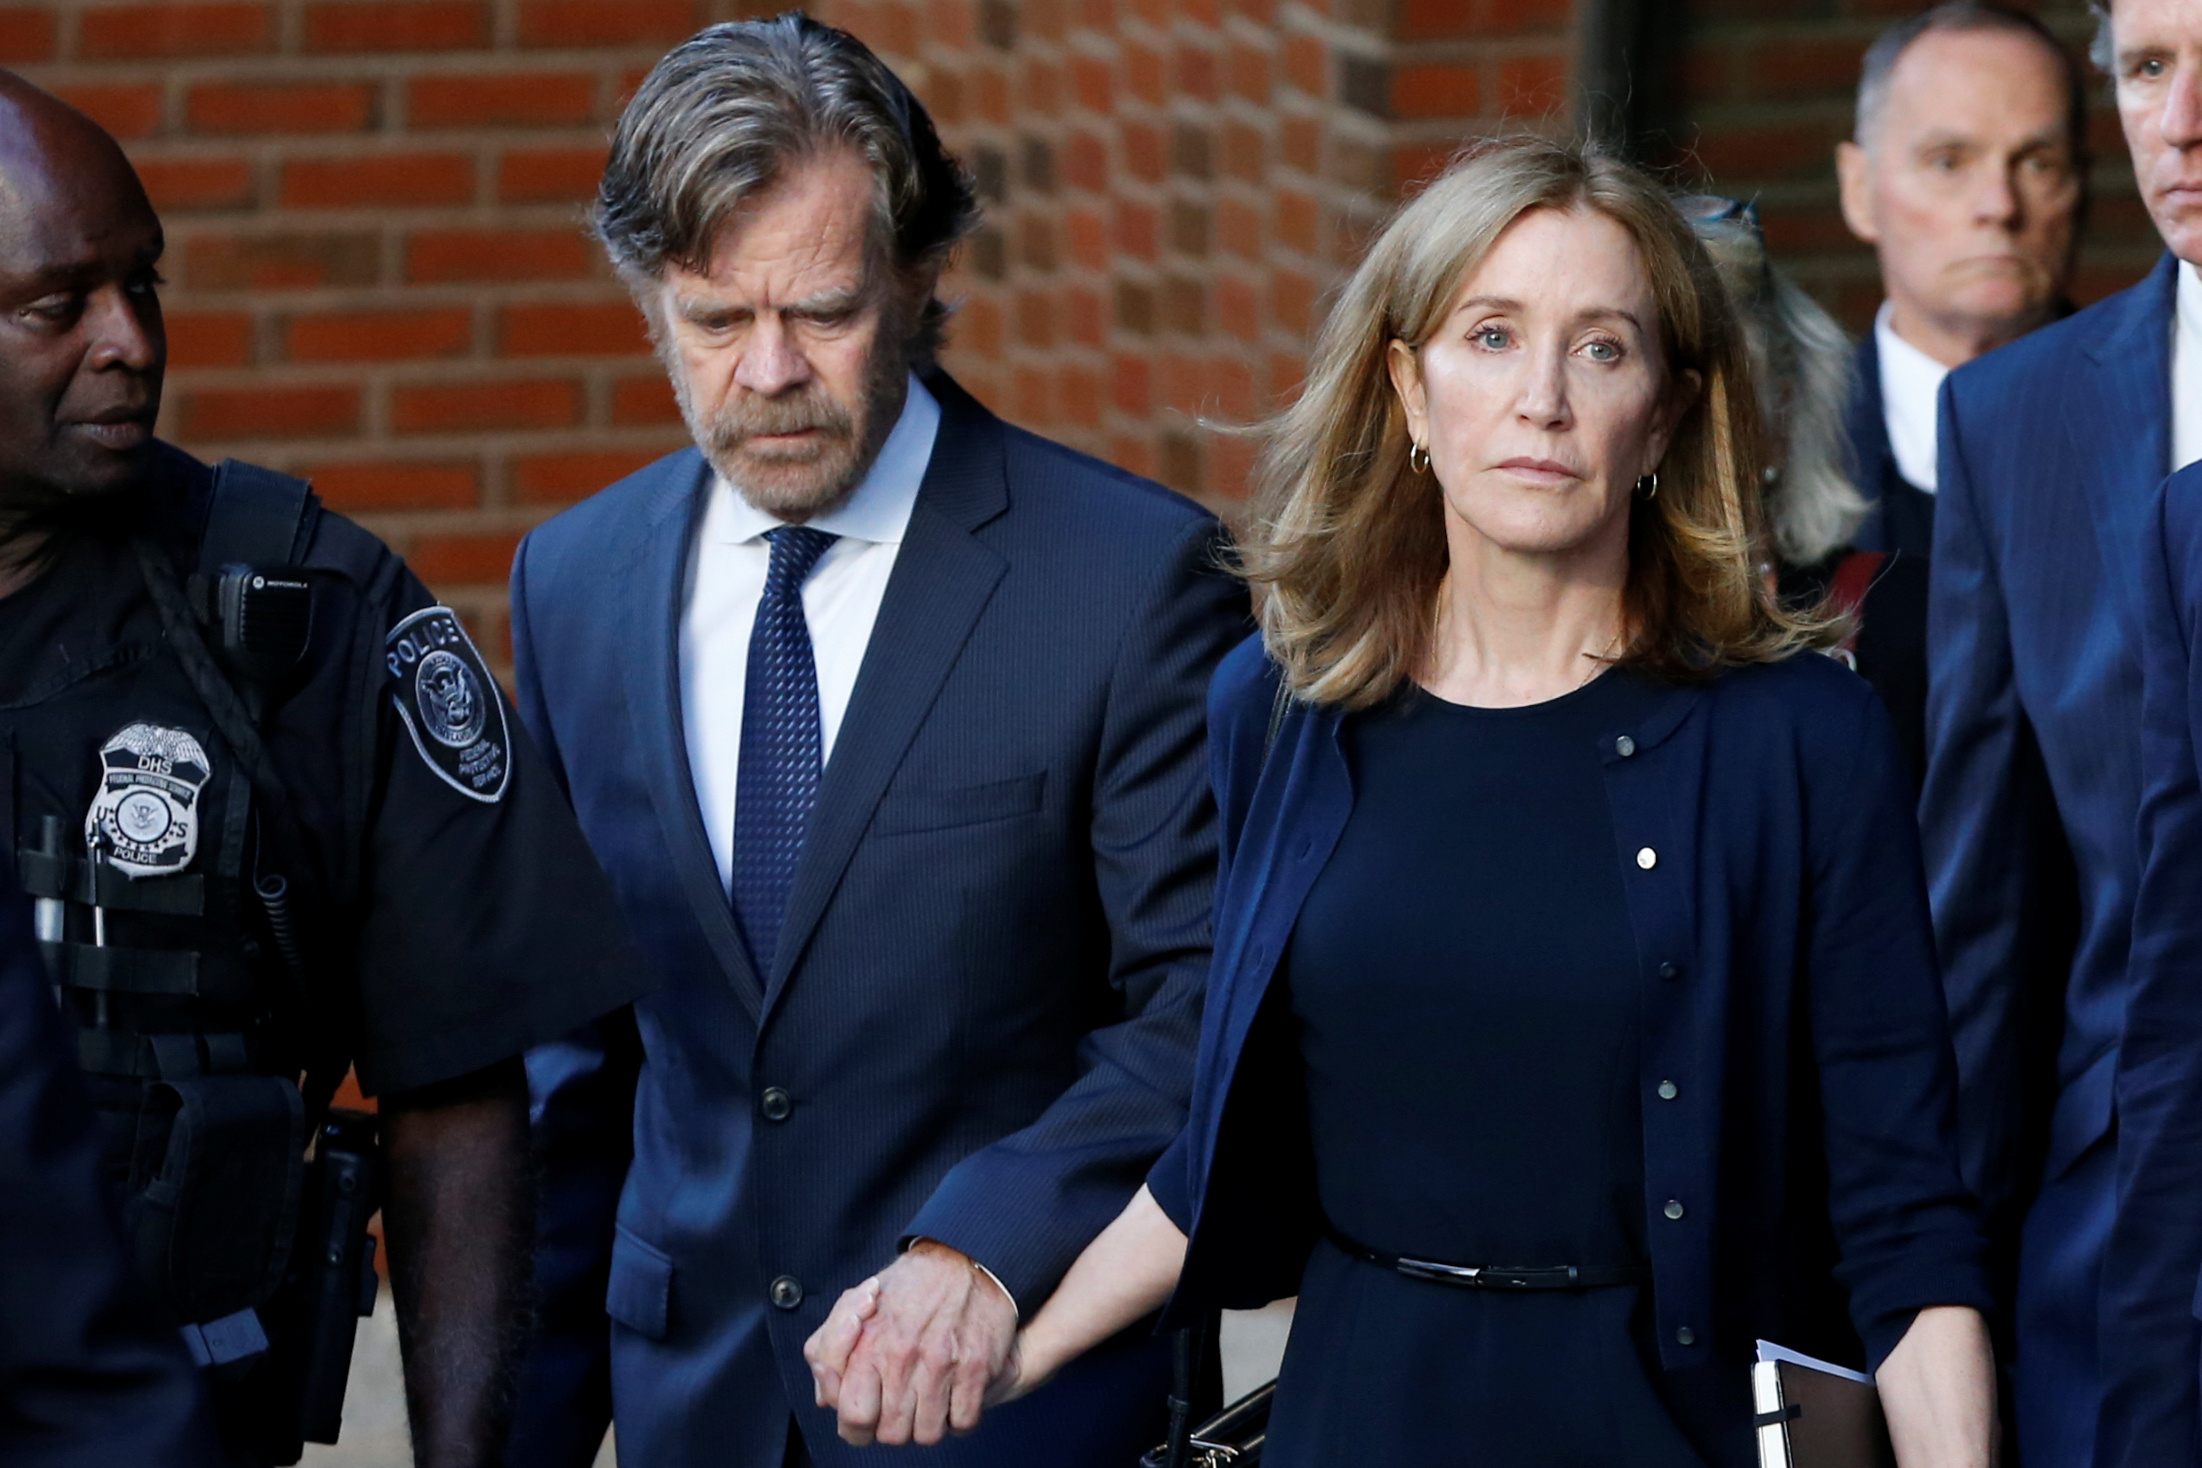 PHOTO: Actress Felicity Huffman leaves the federal courthouse with her husband William H. Macy, after being sentenced in connection with a nationwide college admissions cheating scheme in Boston, Mass., September 13, 2019.